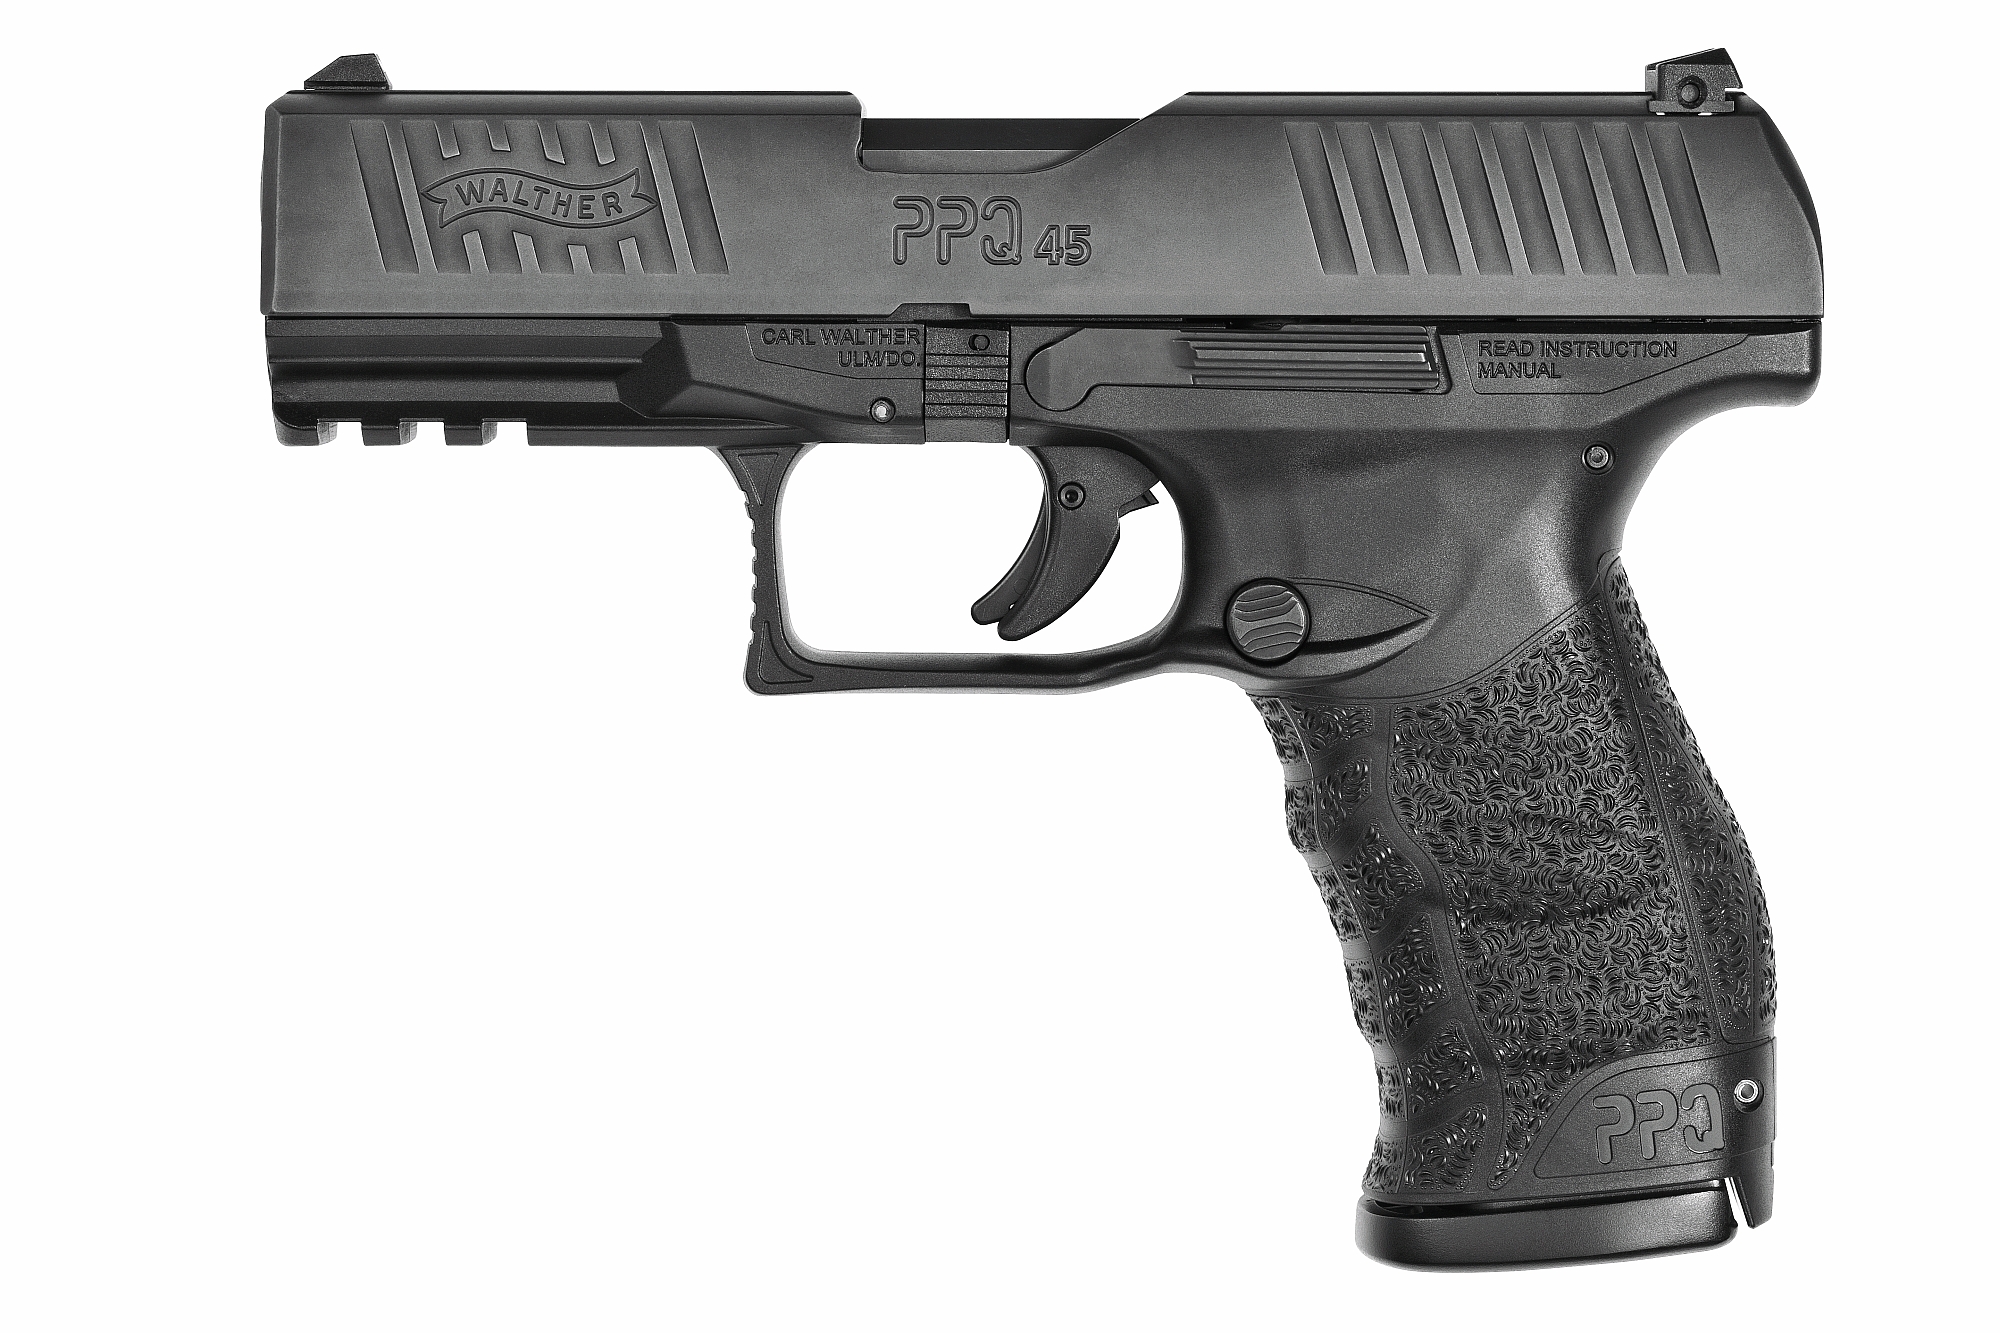 Walther PPQ 45 semiautomatic pistol all4shooters